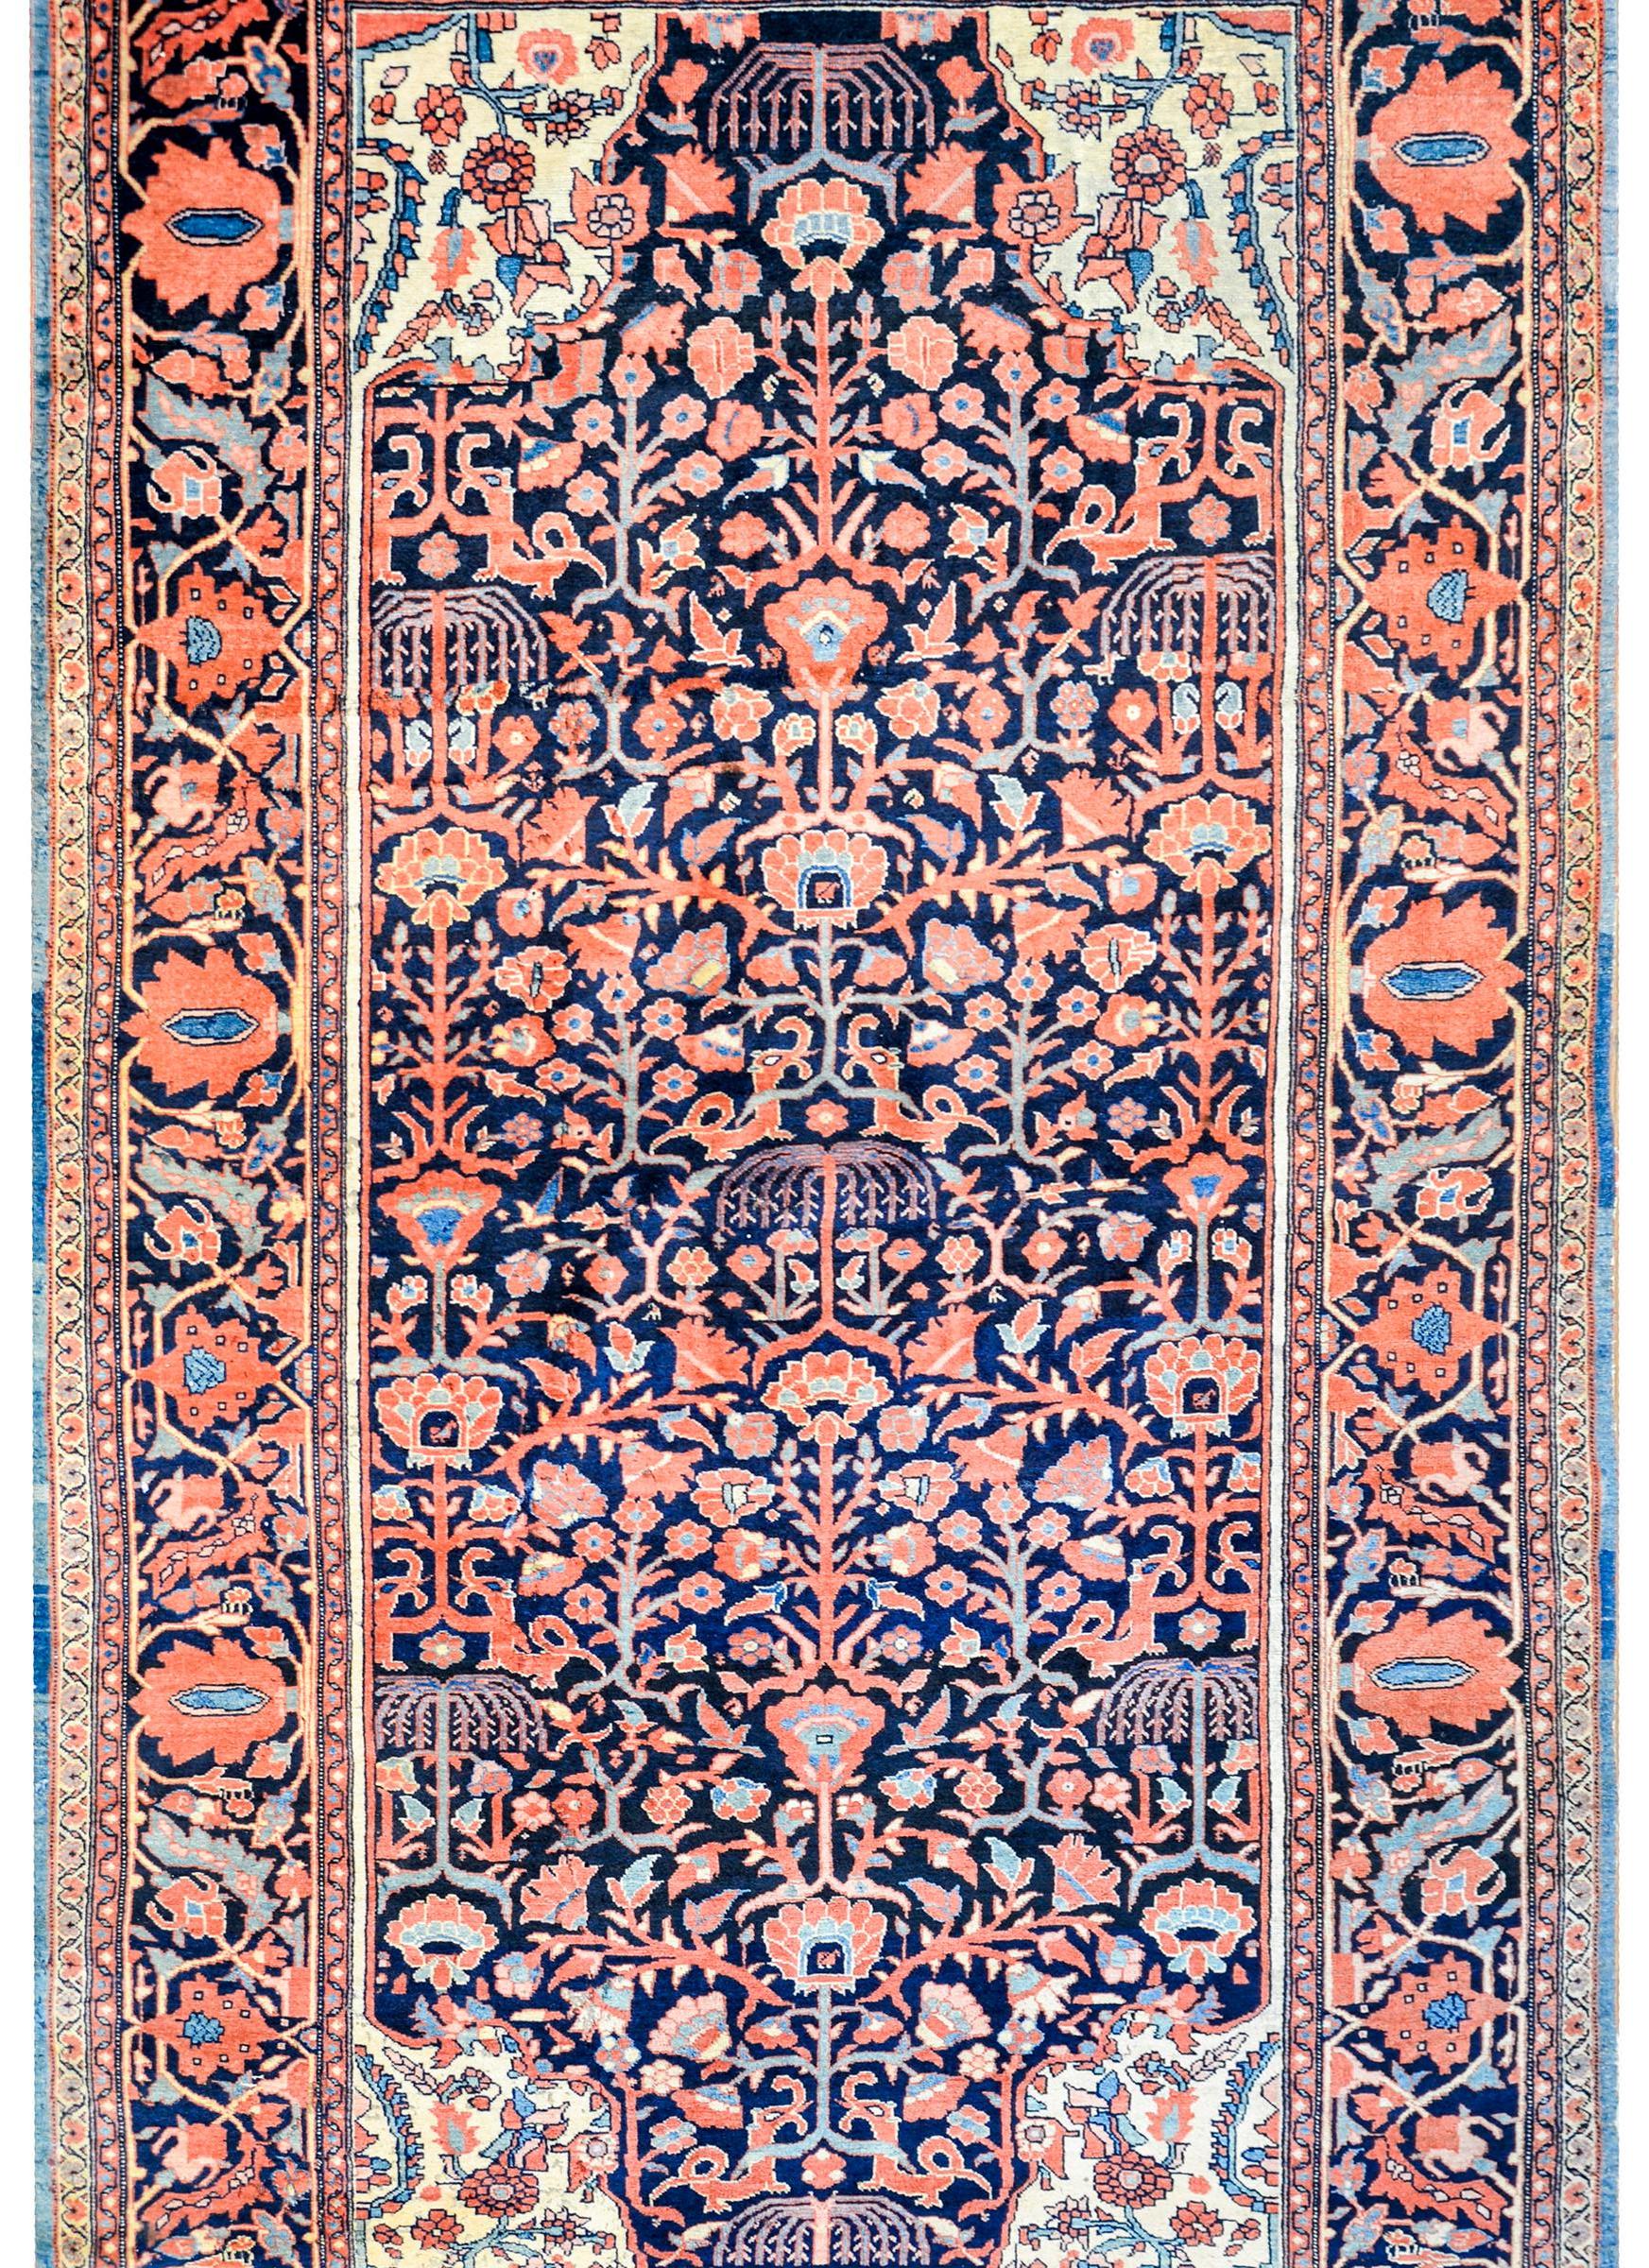 A wonderful early 20th century Persian Sarouk Farahan rug with an incredible all-over tree-of-life pattern woven in coral, salmon, light and dark indigo, and cream colored wool. The border is exceptional with a large scale wide central stripe